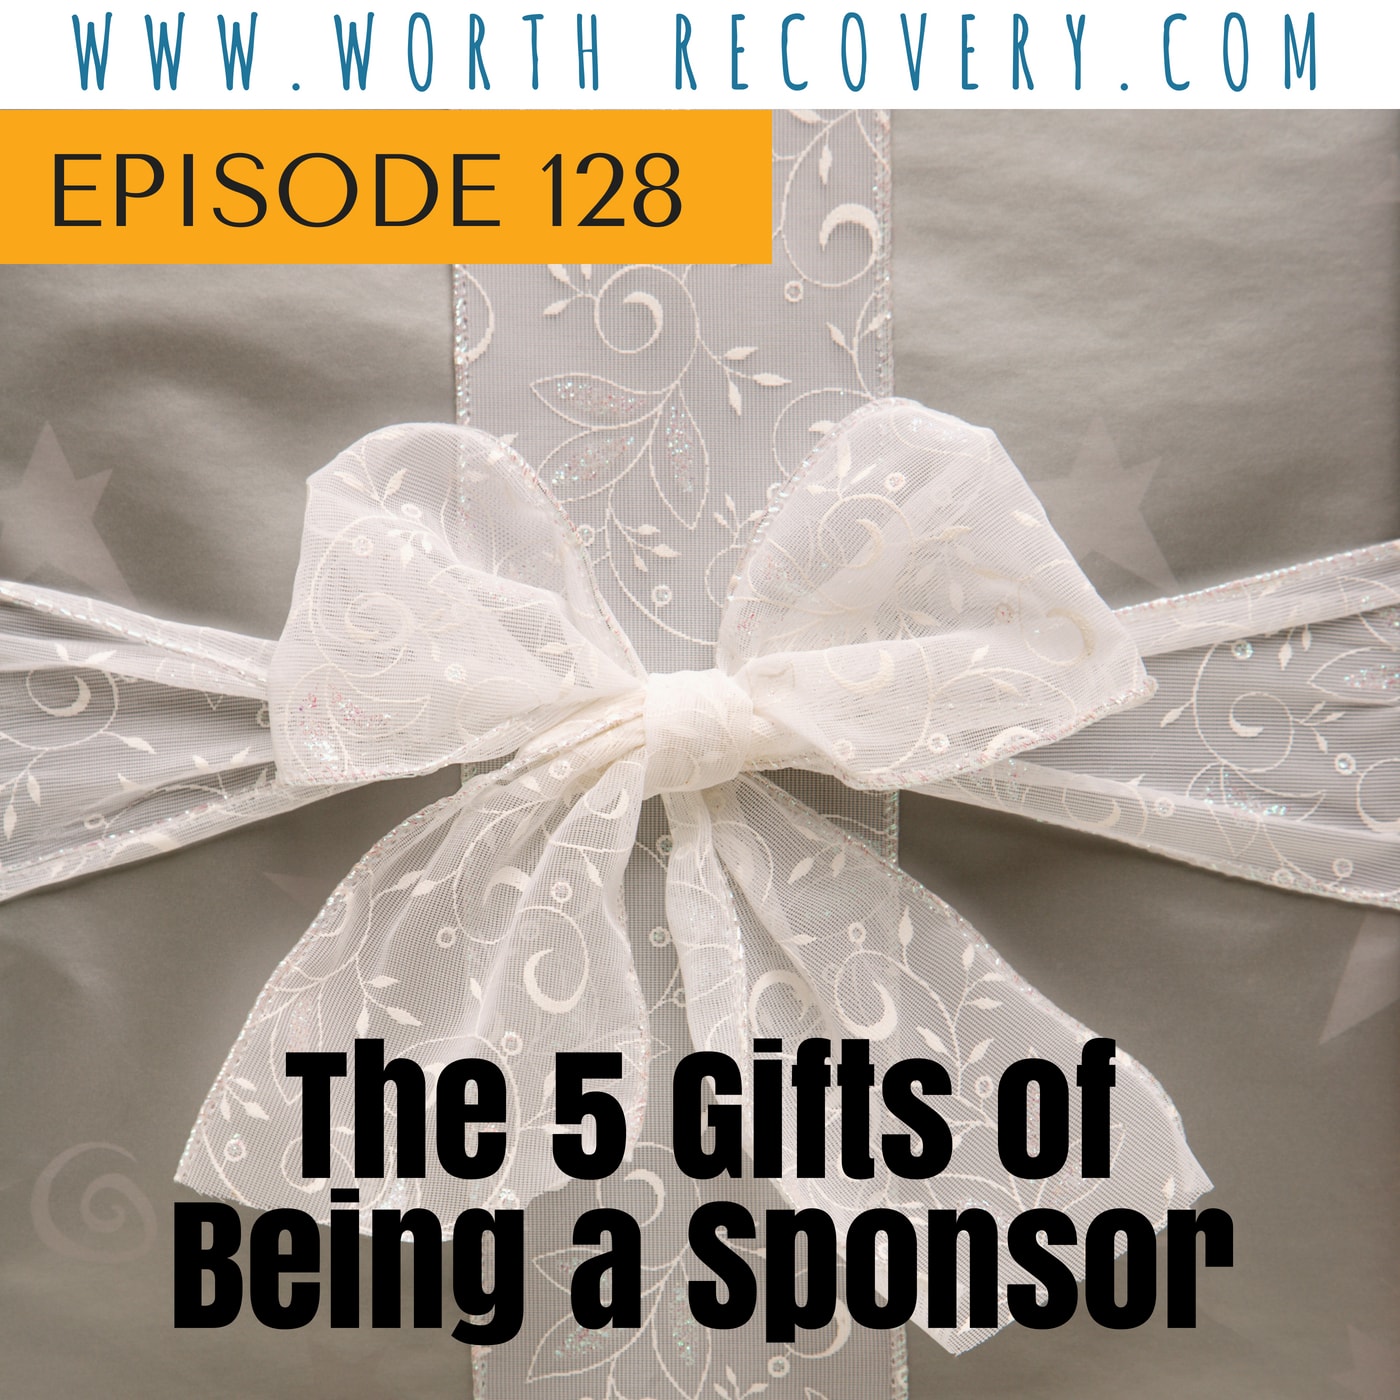 Episode 128: The 5 Gifts of Being a Sponsor